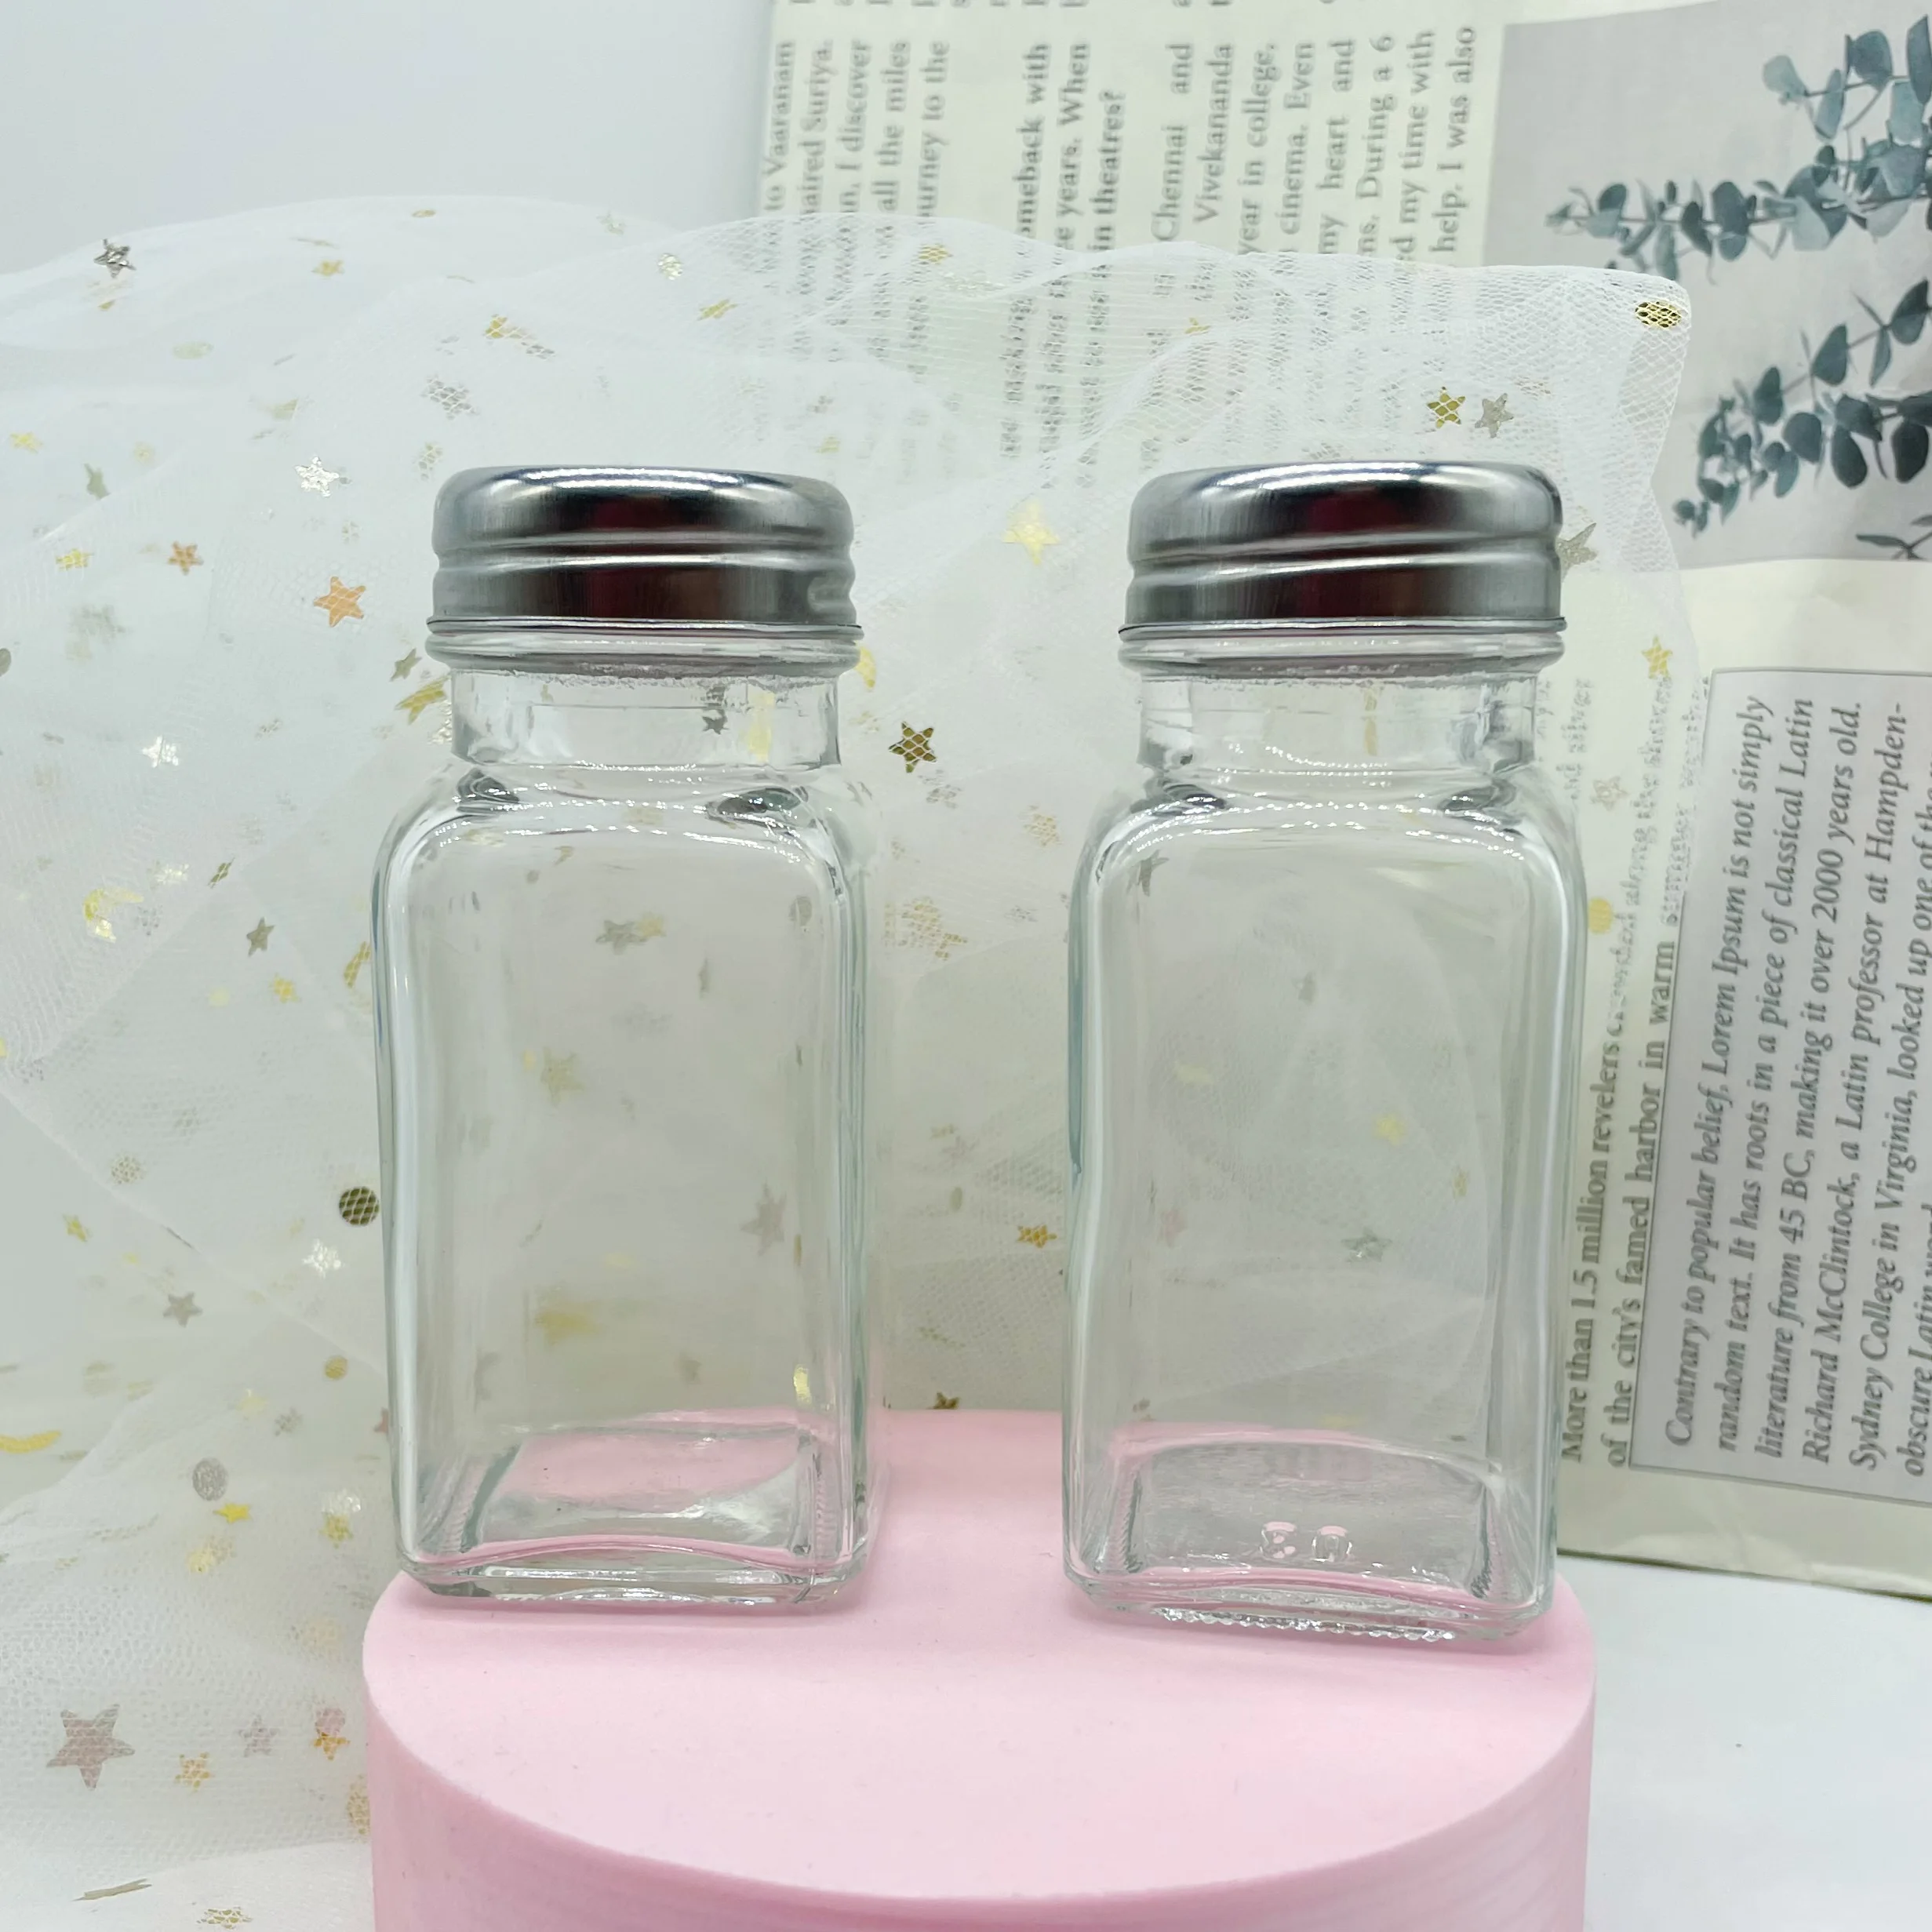 80ml Kitchen Canisters Glass Creative square glass barbecue seasoning spice bottles